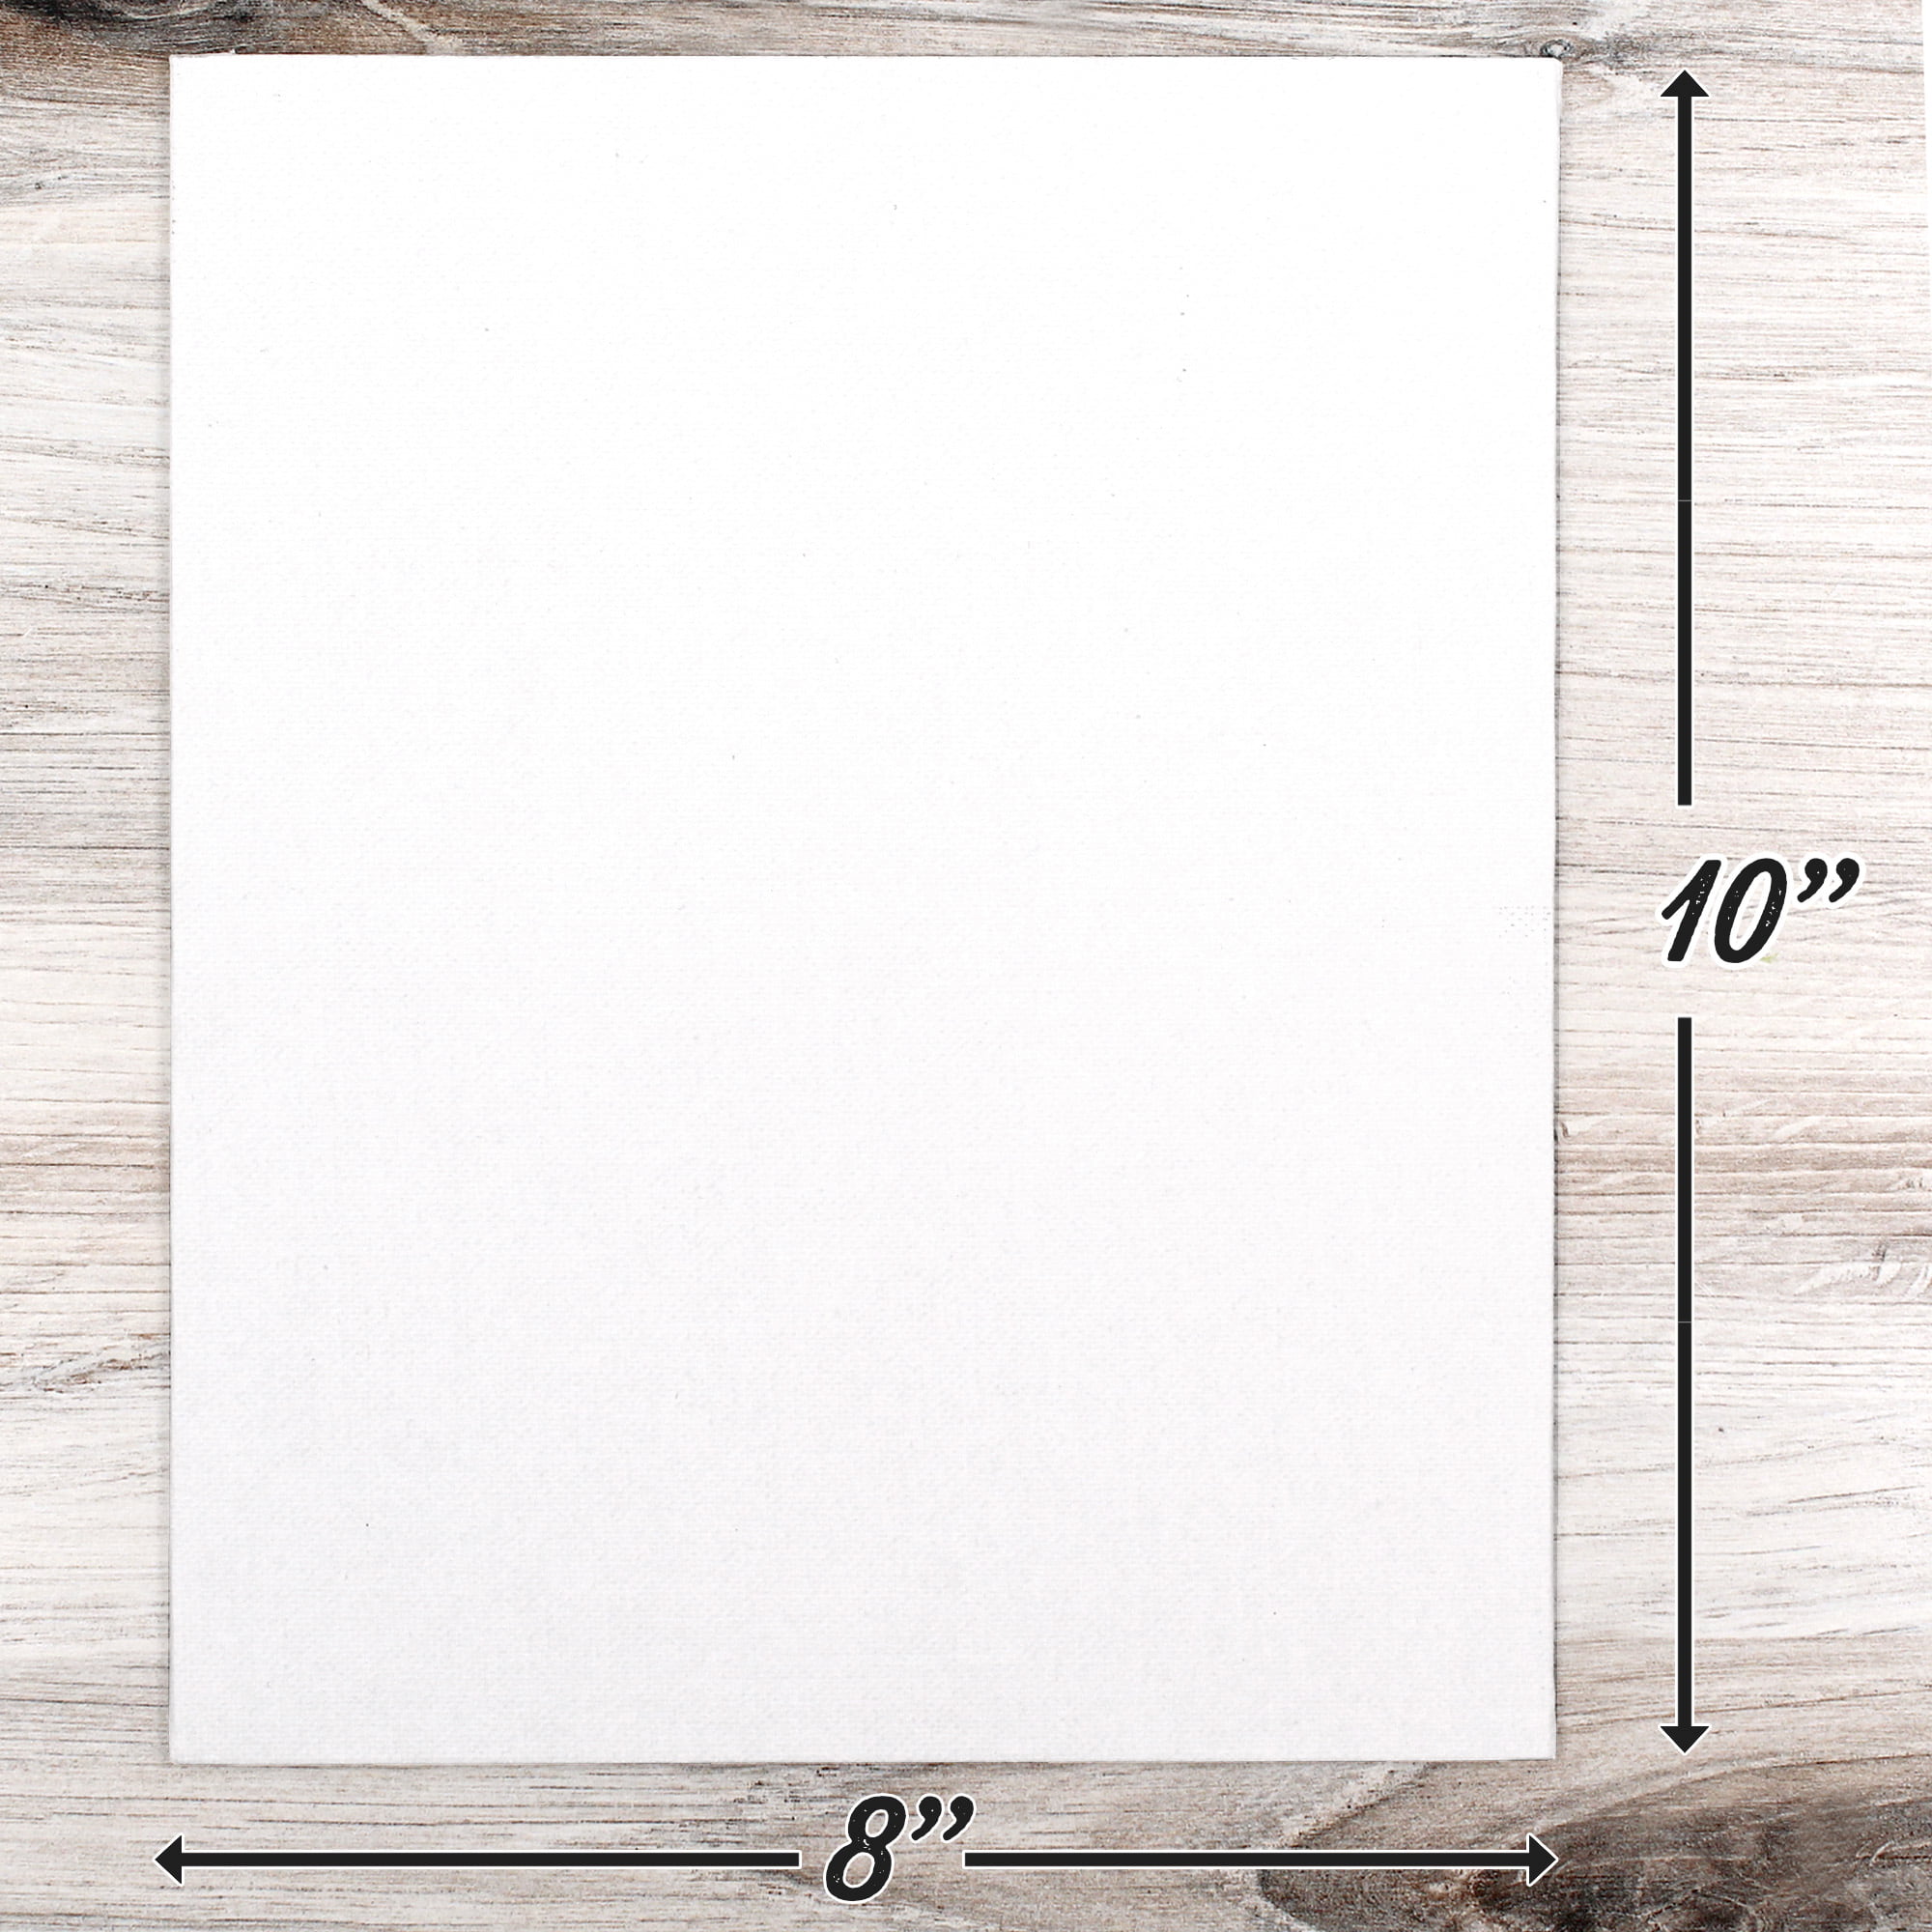 PA Essentials Uncut Blank, Translucent, 8 piece, for Painting on Wood,  Canvas, Paper, Fabric, Wall and Tile, Reusable DIY Art and Craft Stencils  for Painting, 5.5x8.5 Inches